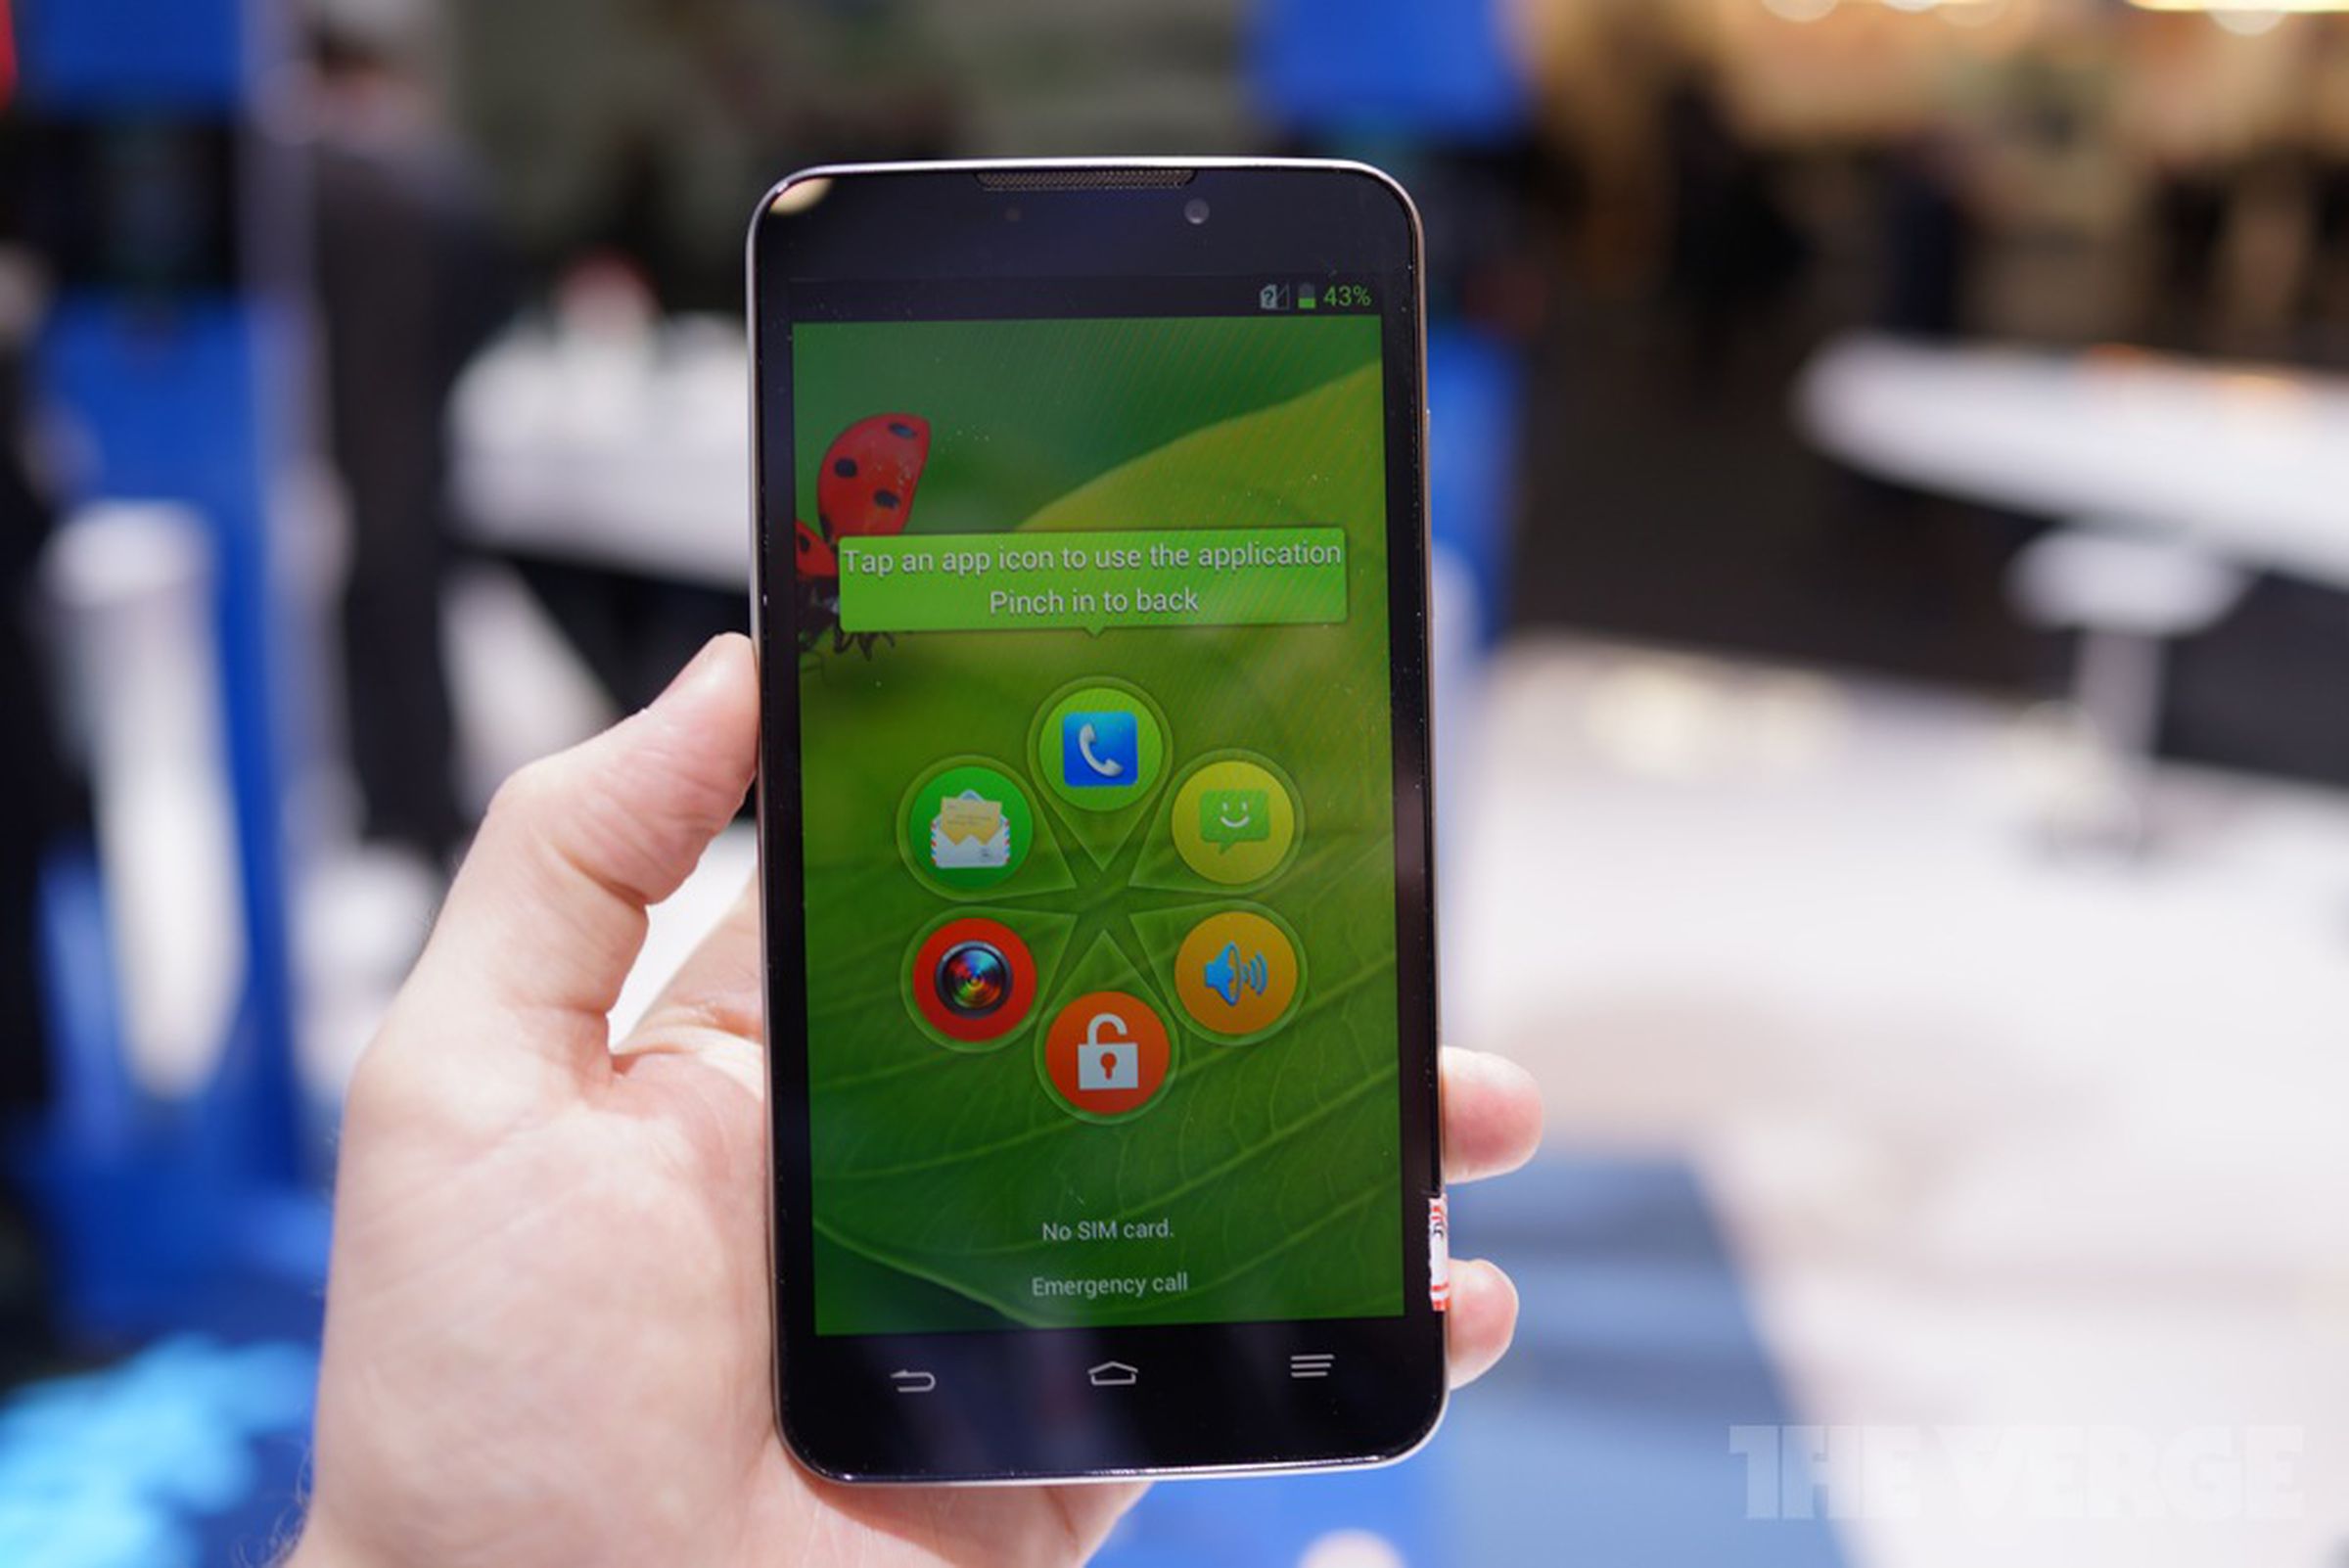 ZTE Grand Memo hands-on pictures